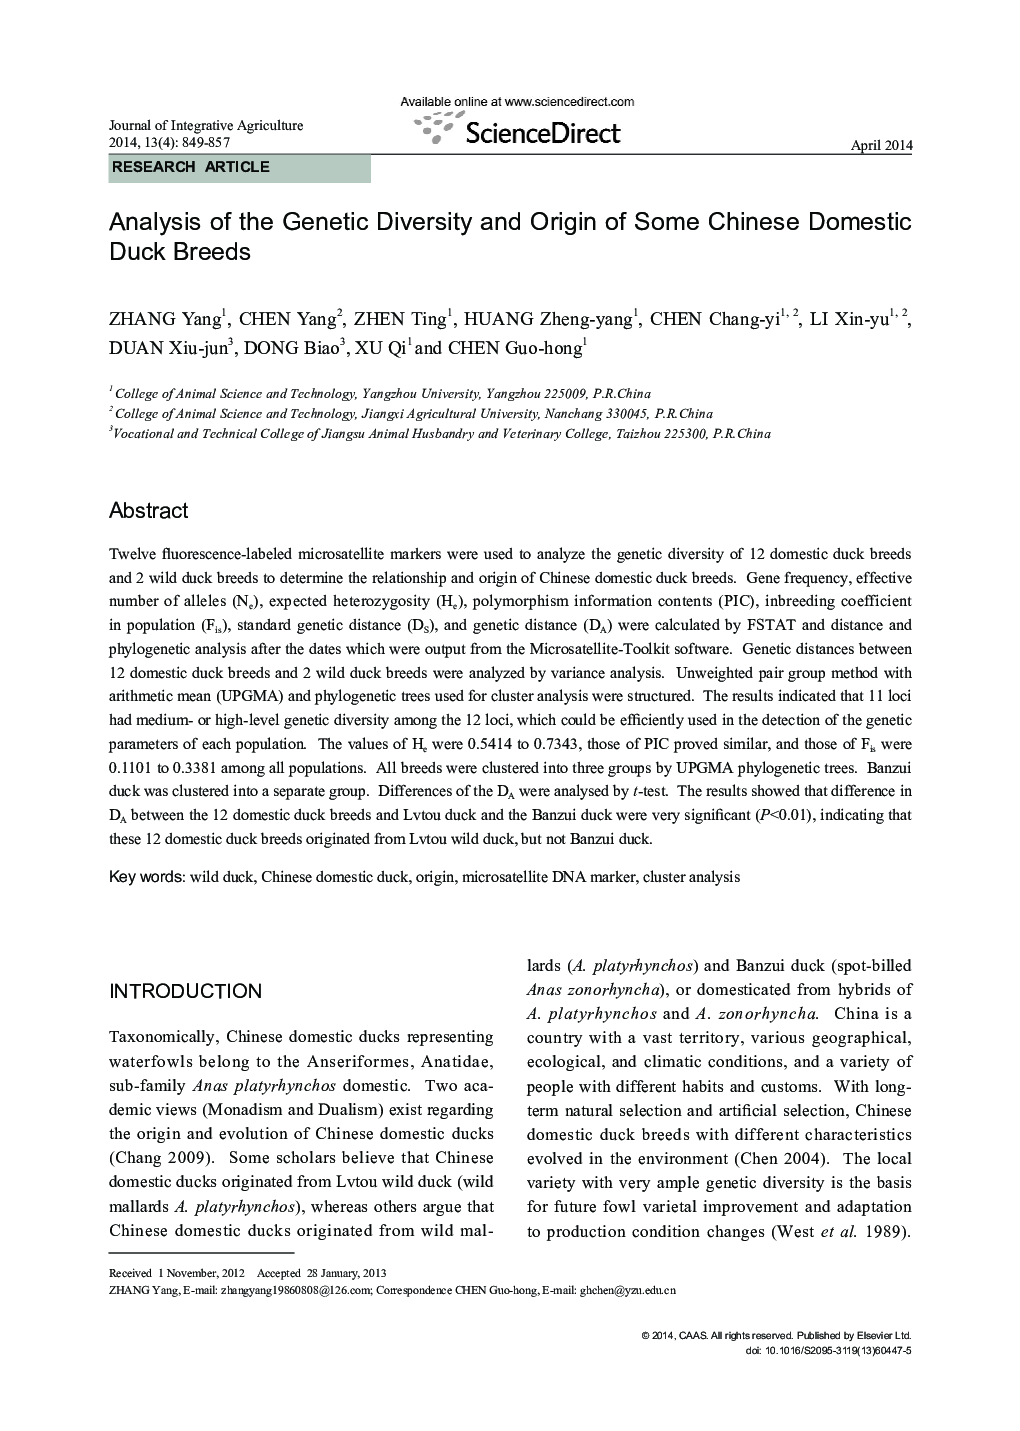 Analysis of the Genetic Diversity and Origin of Some Chinese Domestic Duck Breeds